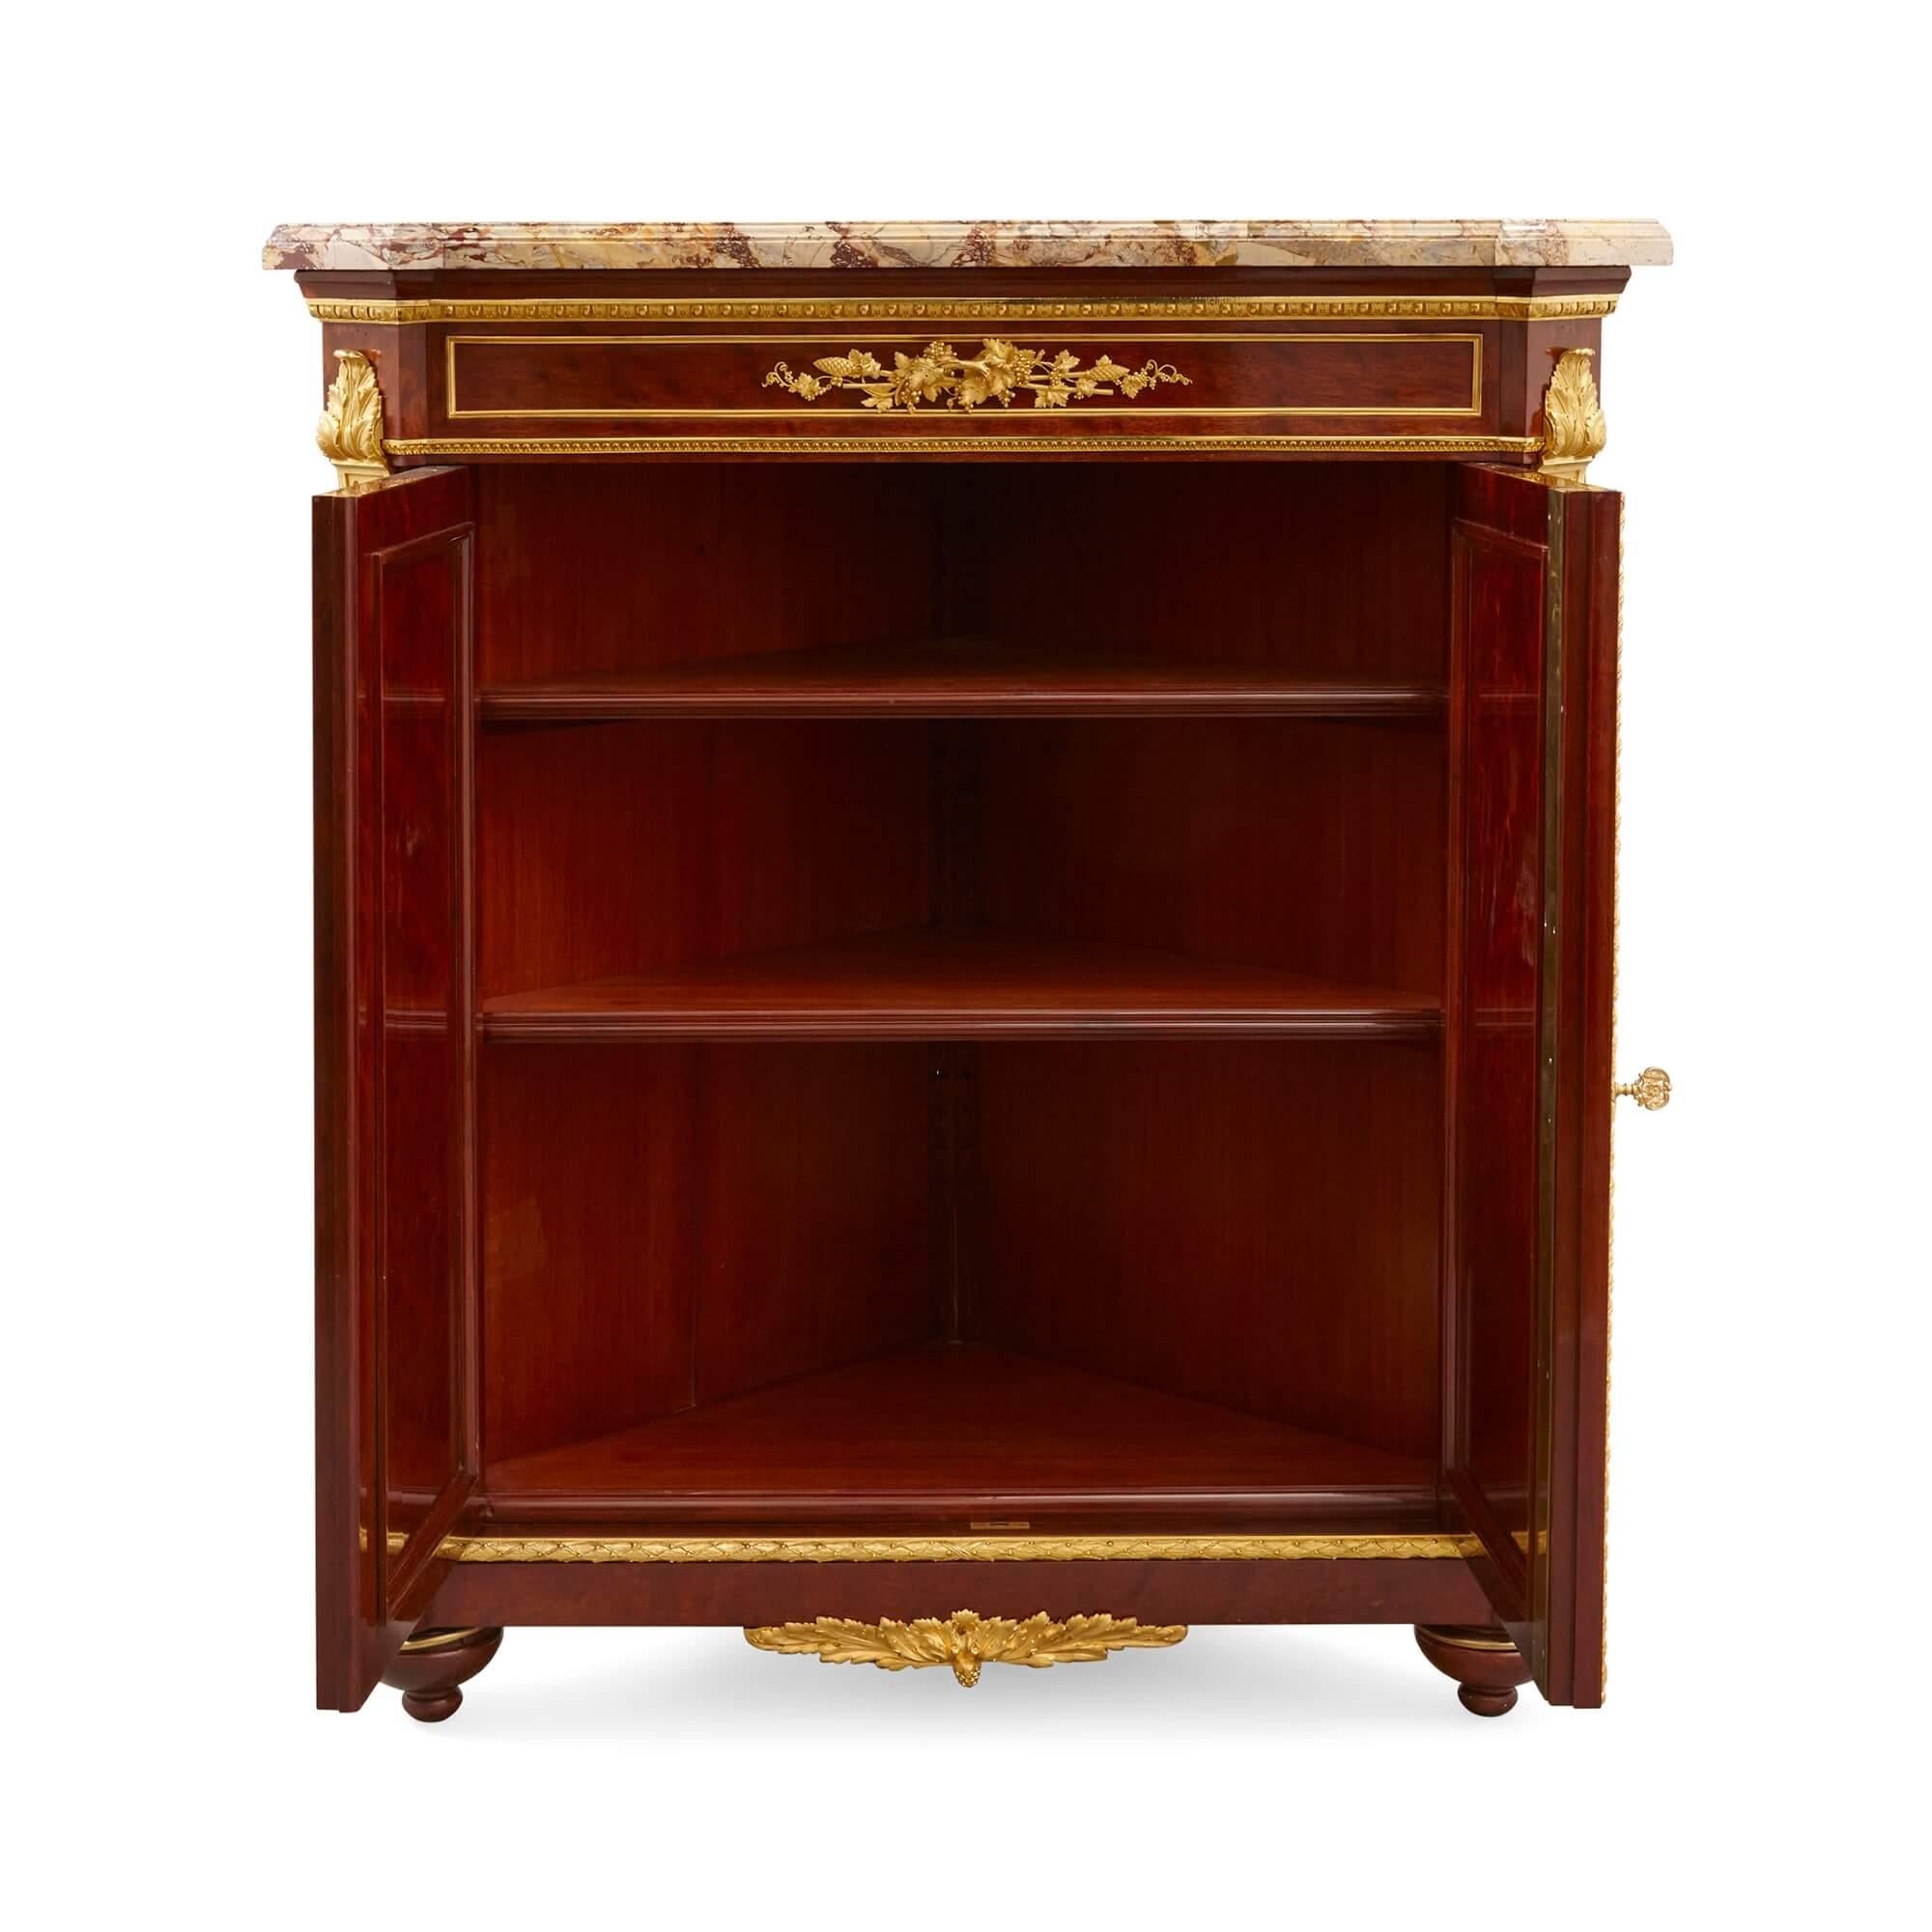 French Pair of Antique Ormolu Mounted and Mahogany Corner Cabinets by Grohé Frères For Sale